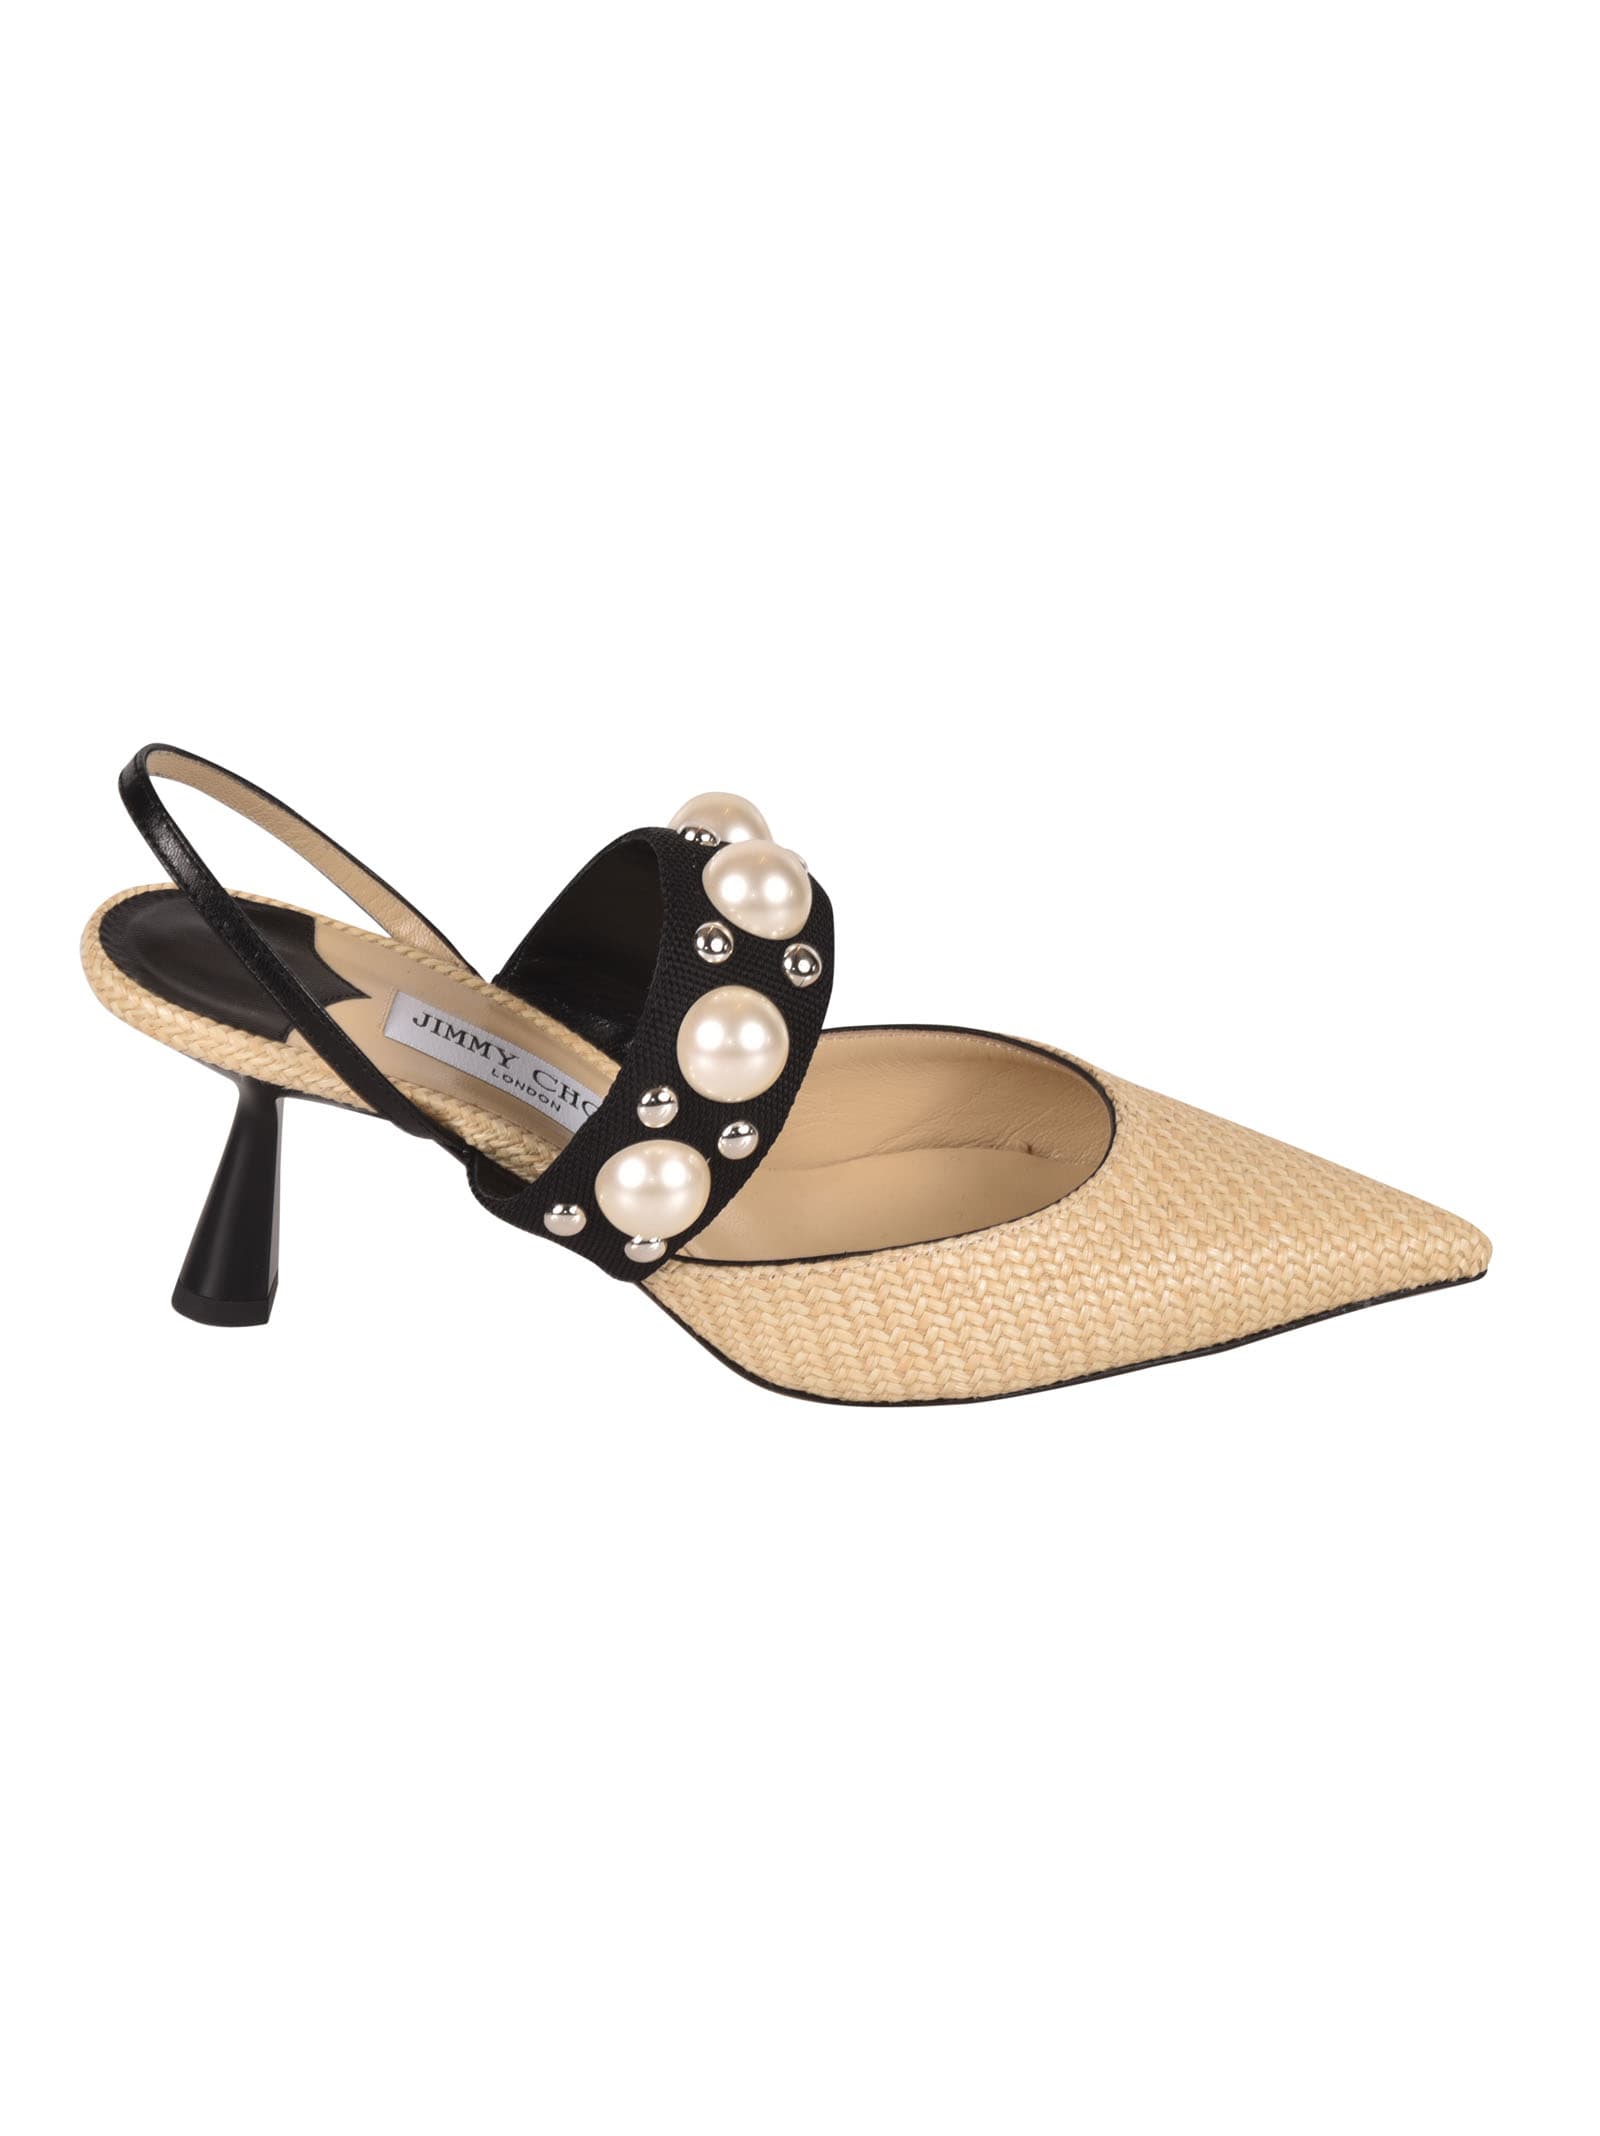 Buy Jimmy Choo Breslin Pumps online, shop Jimmy Choo shoes with free shipping